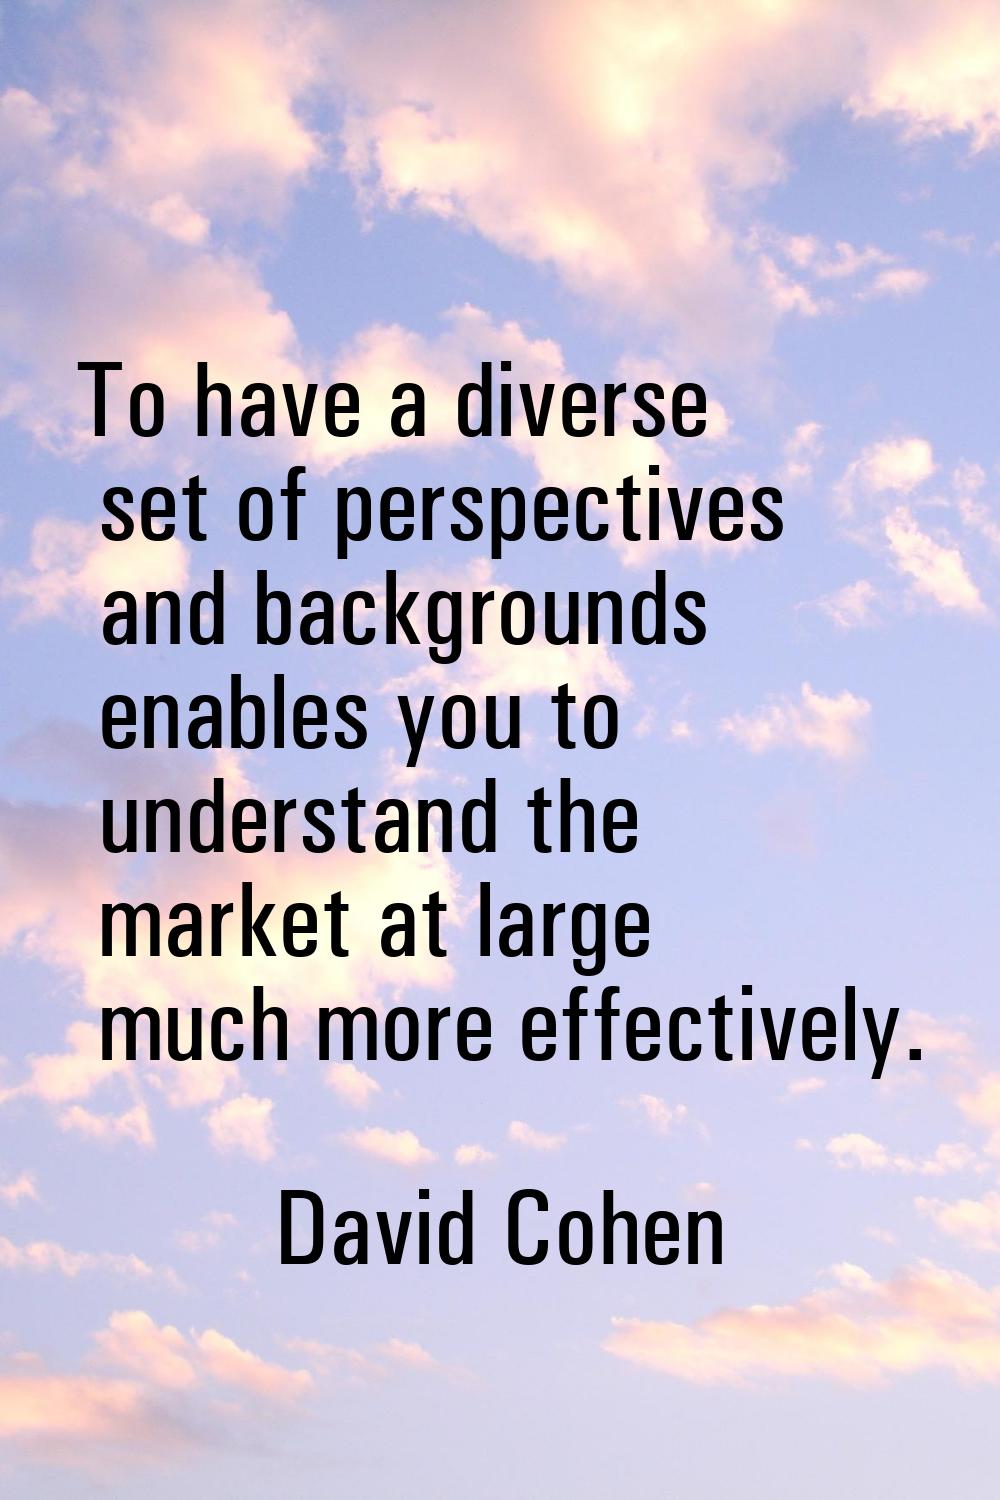 To have a diverse set of perspectives and backgrounds enables you to understand the market at large